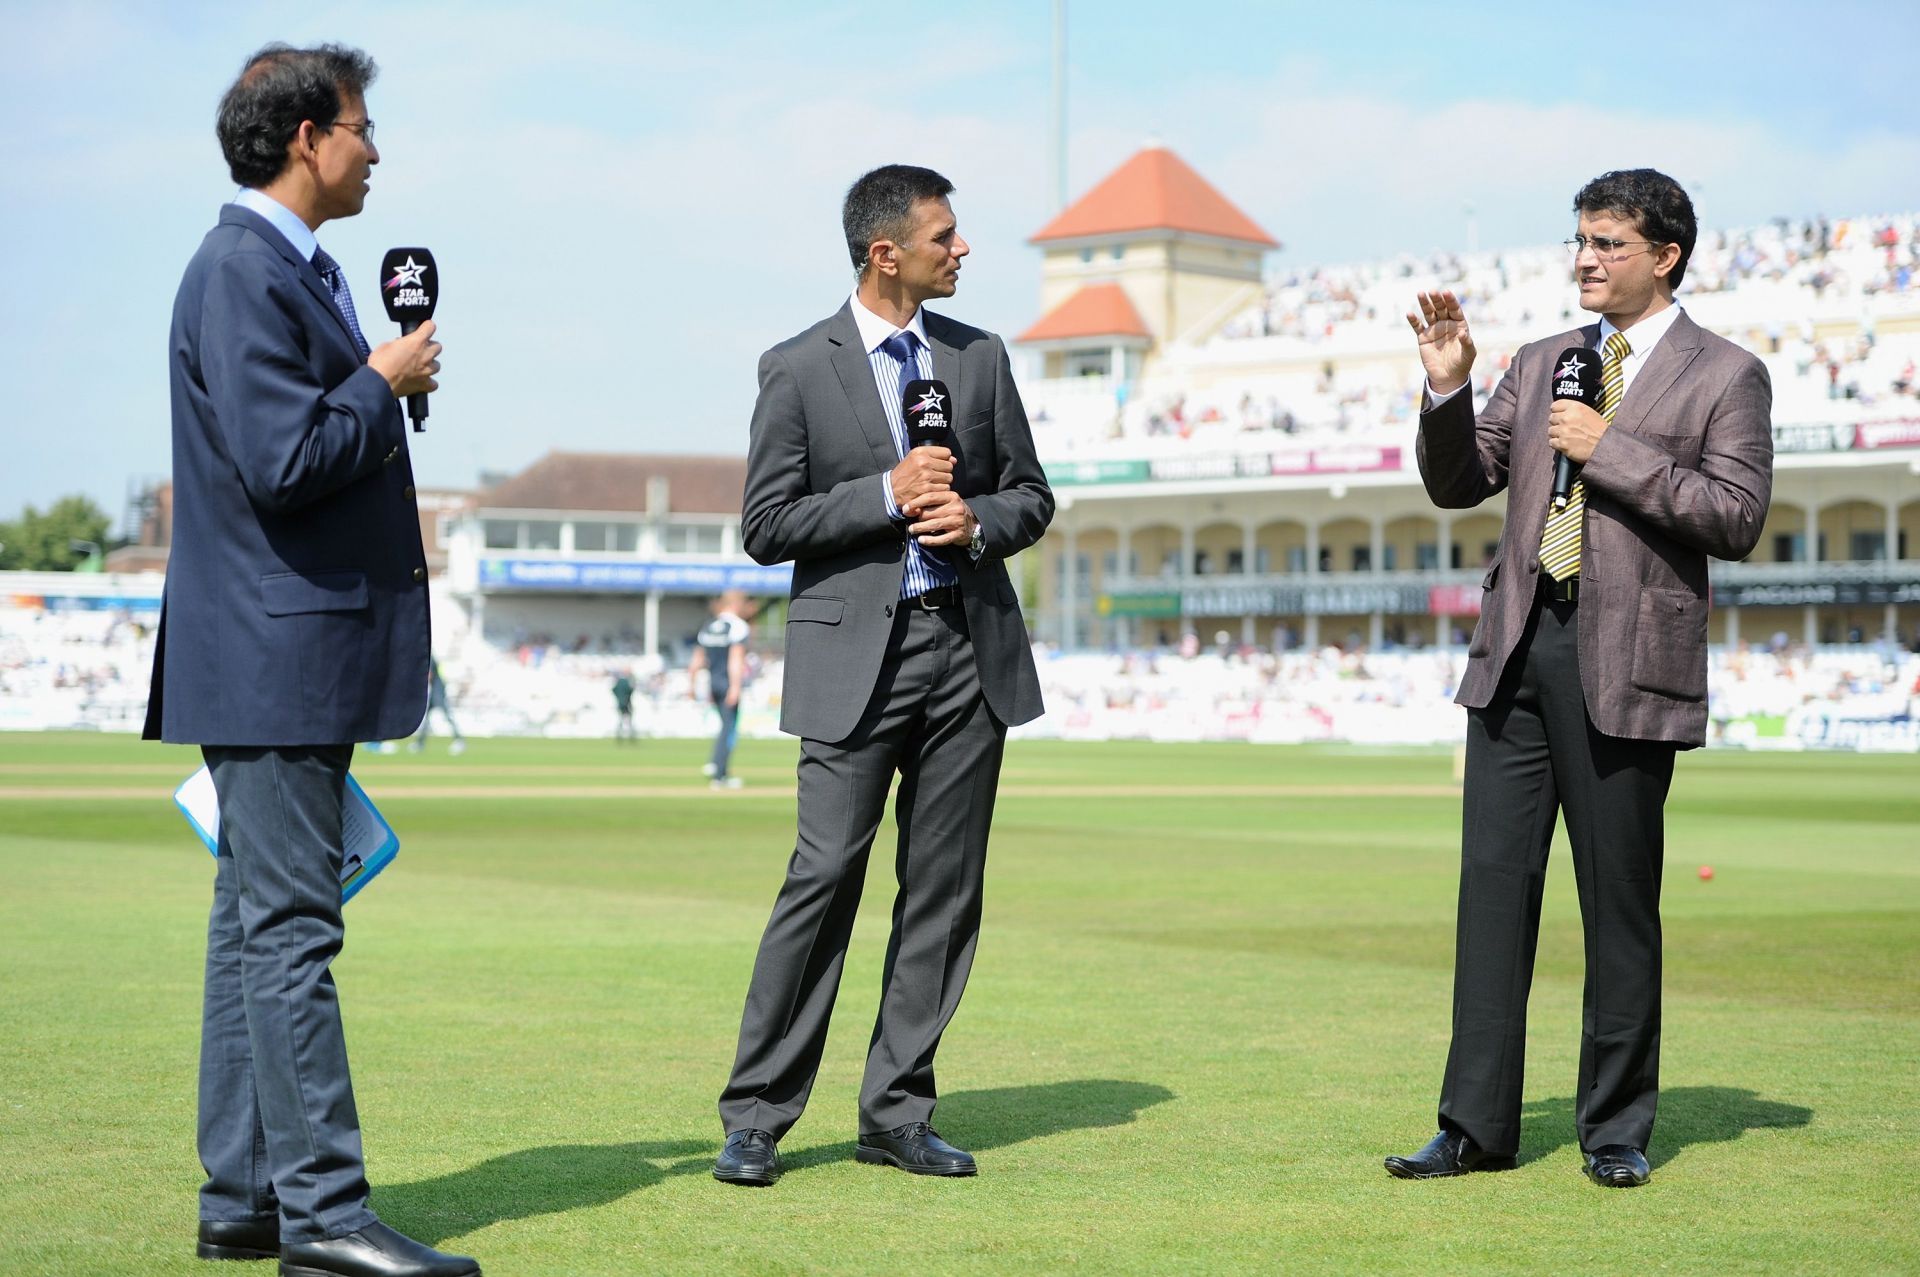 Rahul Dravid (middle) and Sourav Ganguly (right) during a commentary stint. Pic: Getty Images